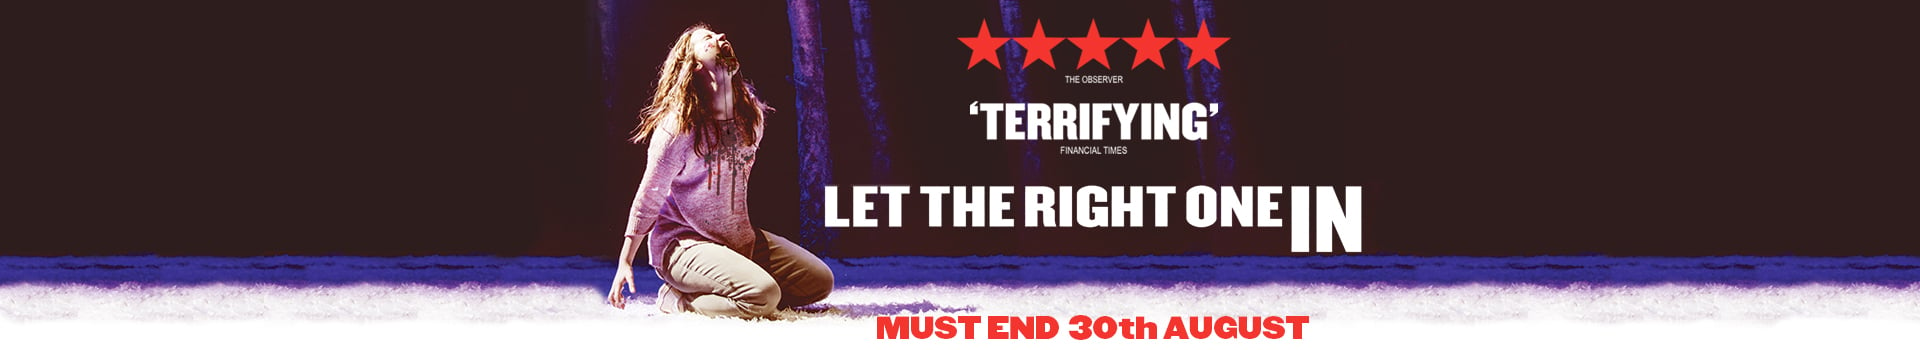 Let The Right One In banner image